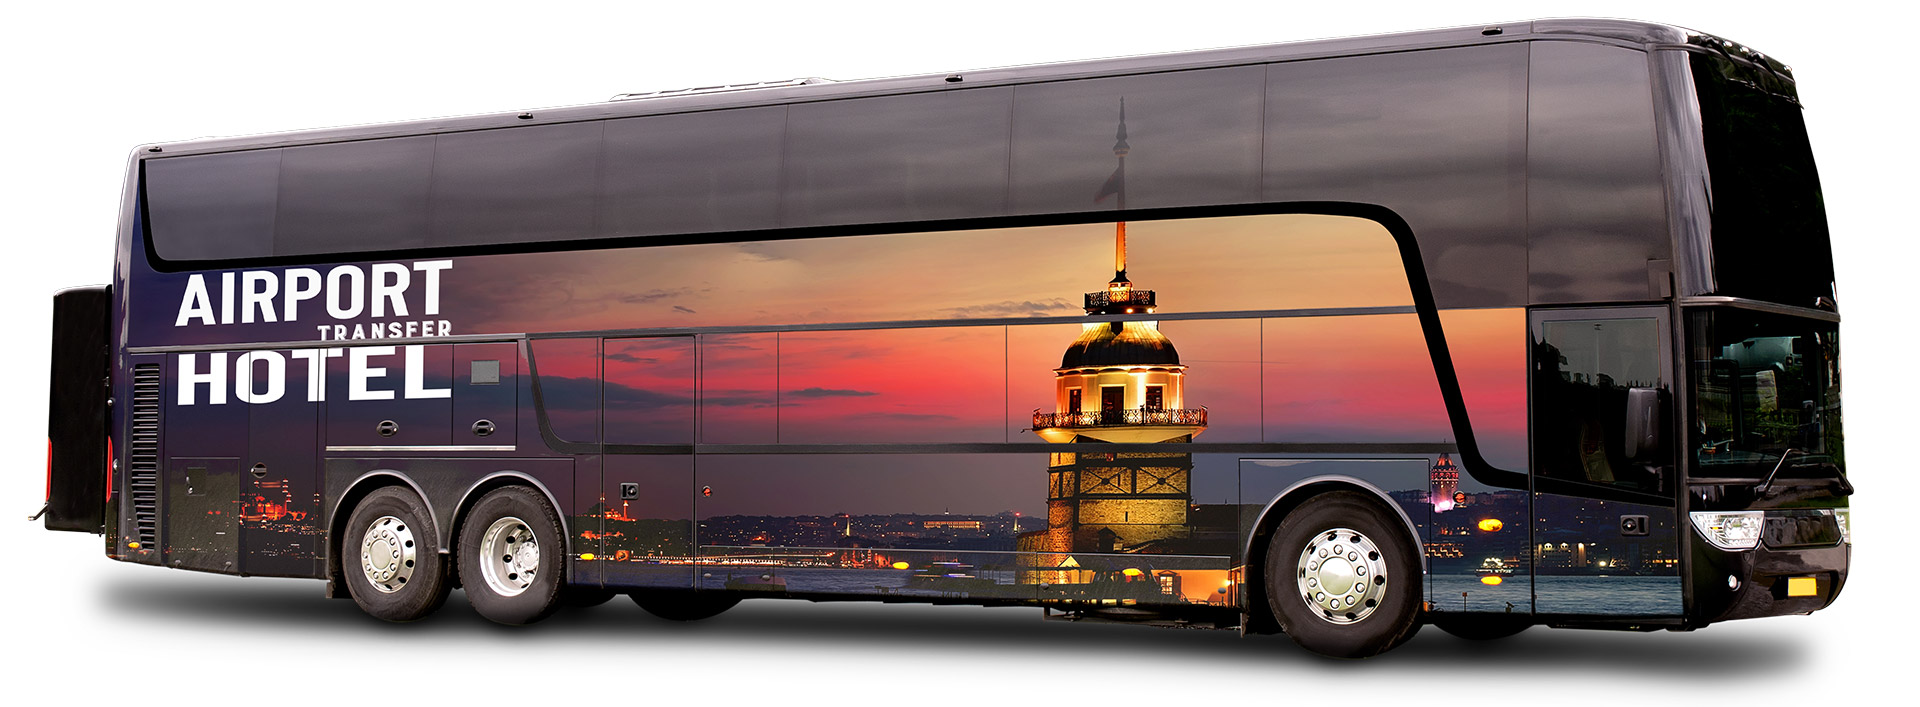 airport transfer hotel bus